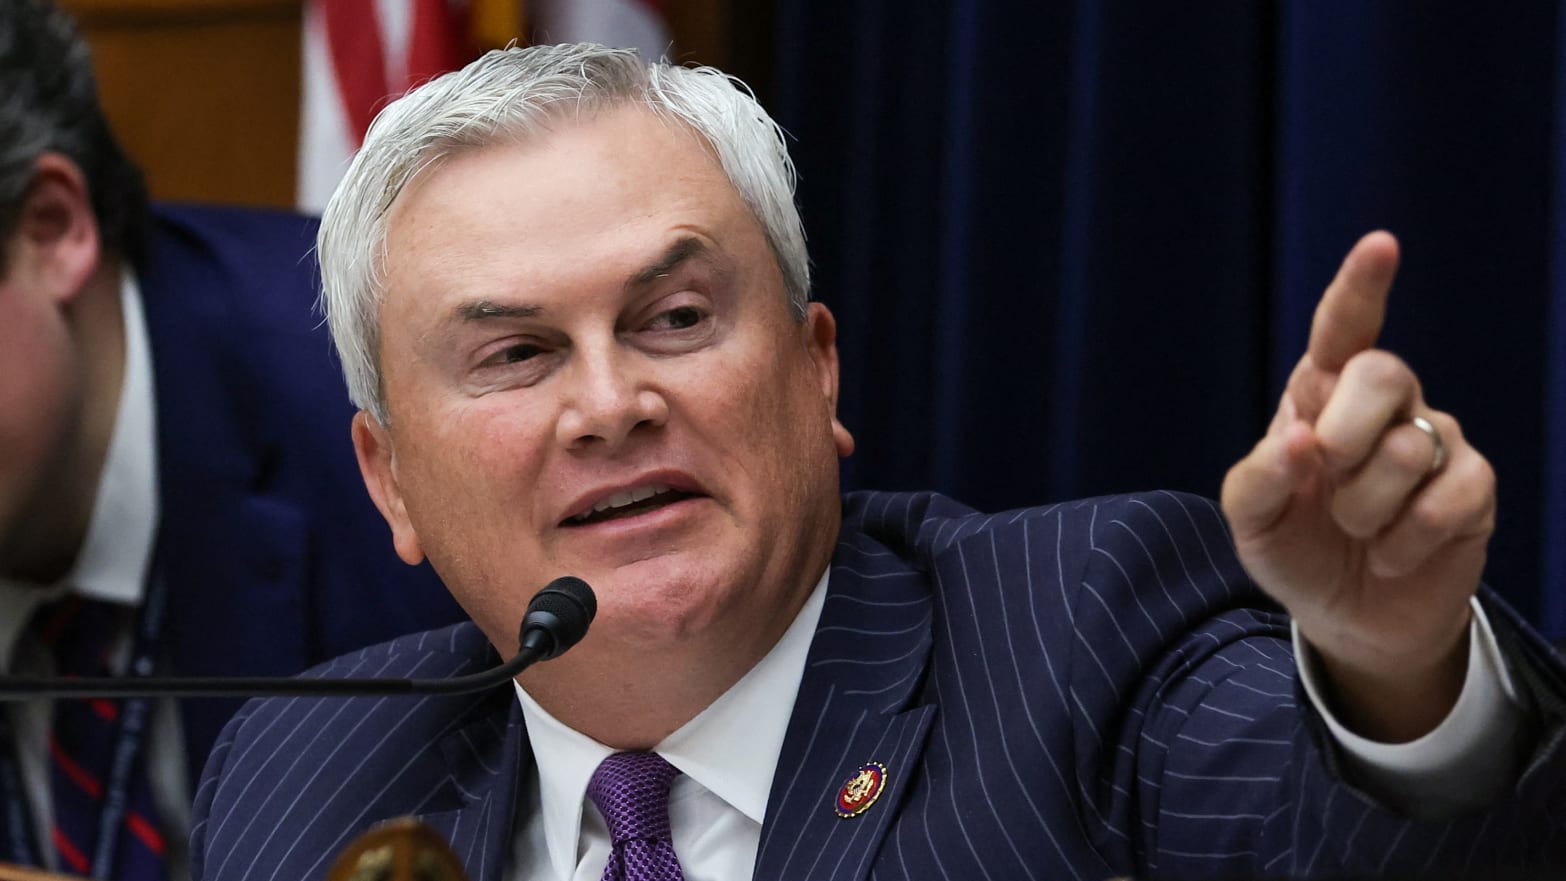 Chairman James Comer (R-KY) gestures as he speaks during a House Oversight and Accountability Committee impeachment inquiry